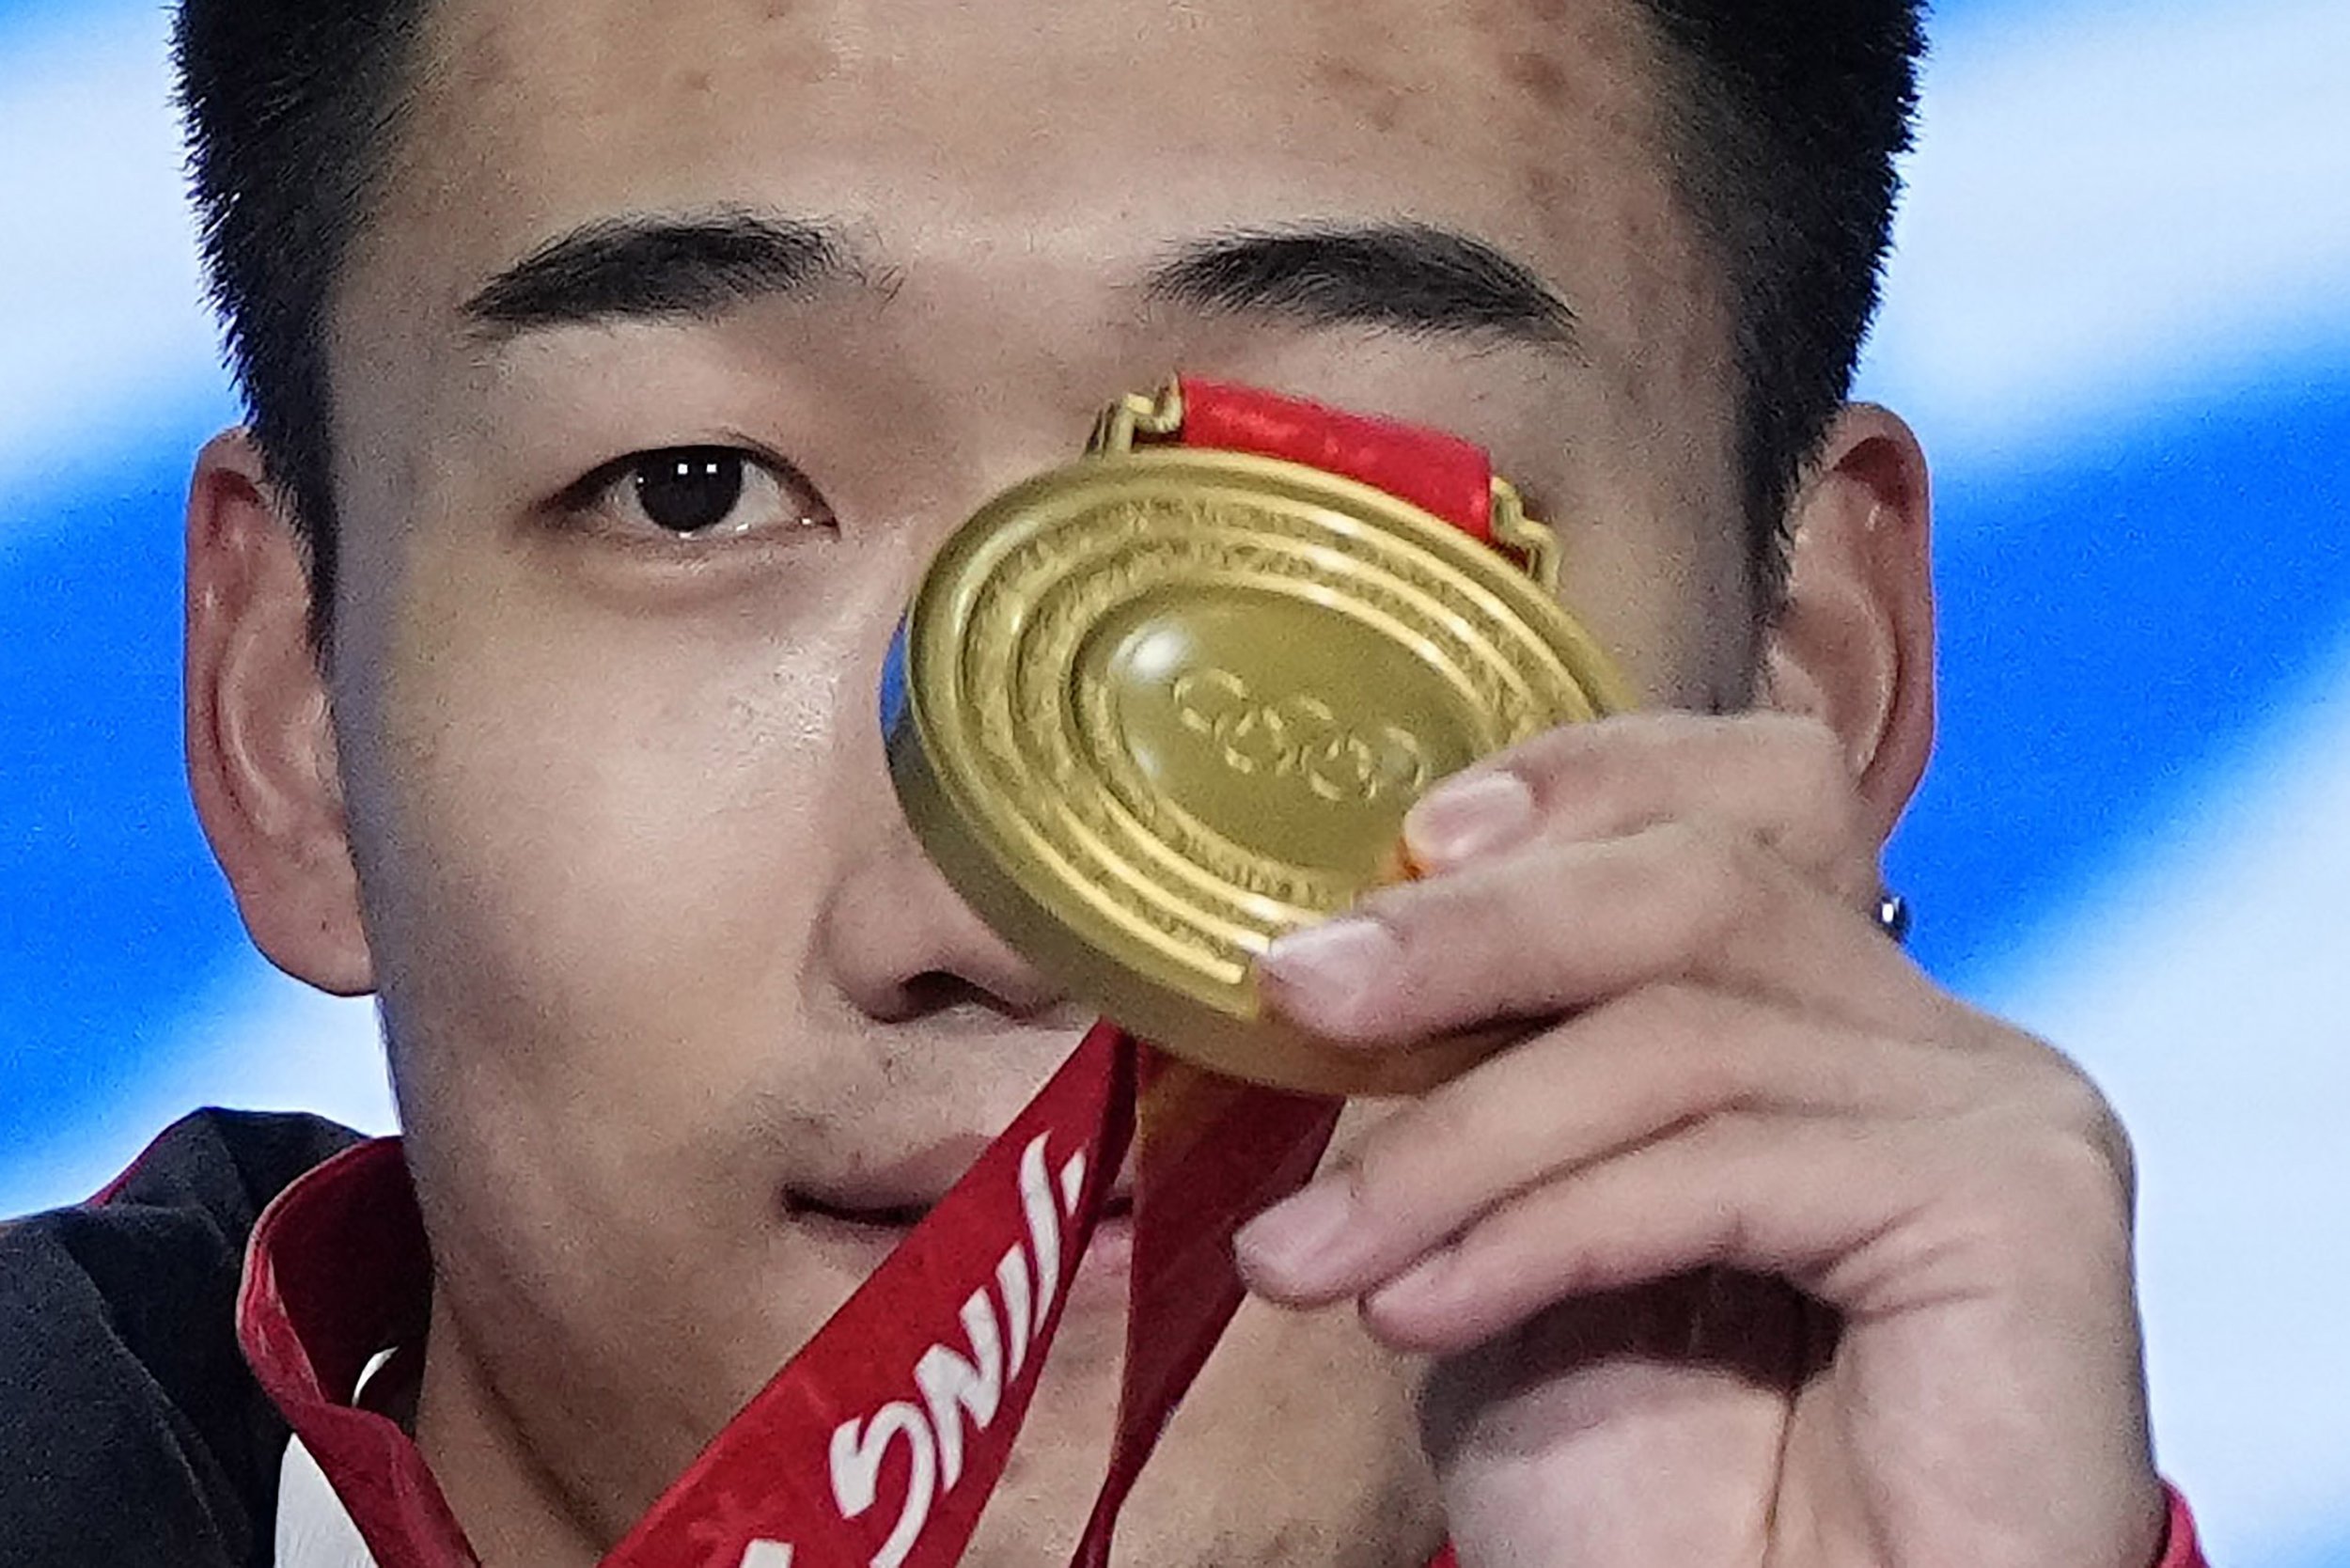  Gao Tingyu of China holds up his gold medal during the medal ceremony for the men's 500-meter speedskating at the 2022 Winter Olympics, Saturday, Feb. 12, 2022, in Beijing. (AP Photo/Jae C. Hong) 